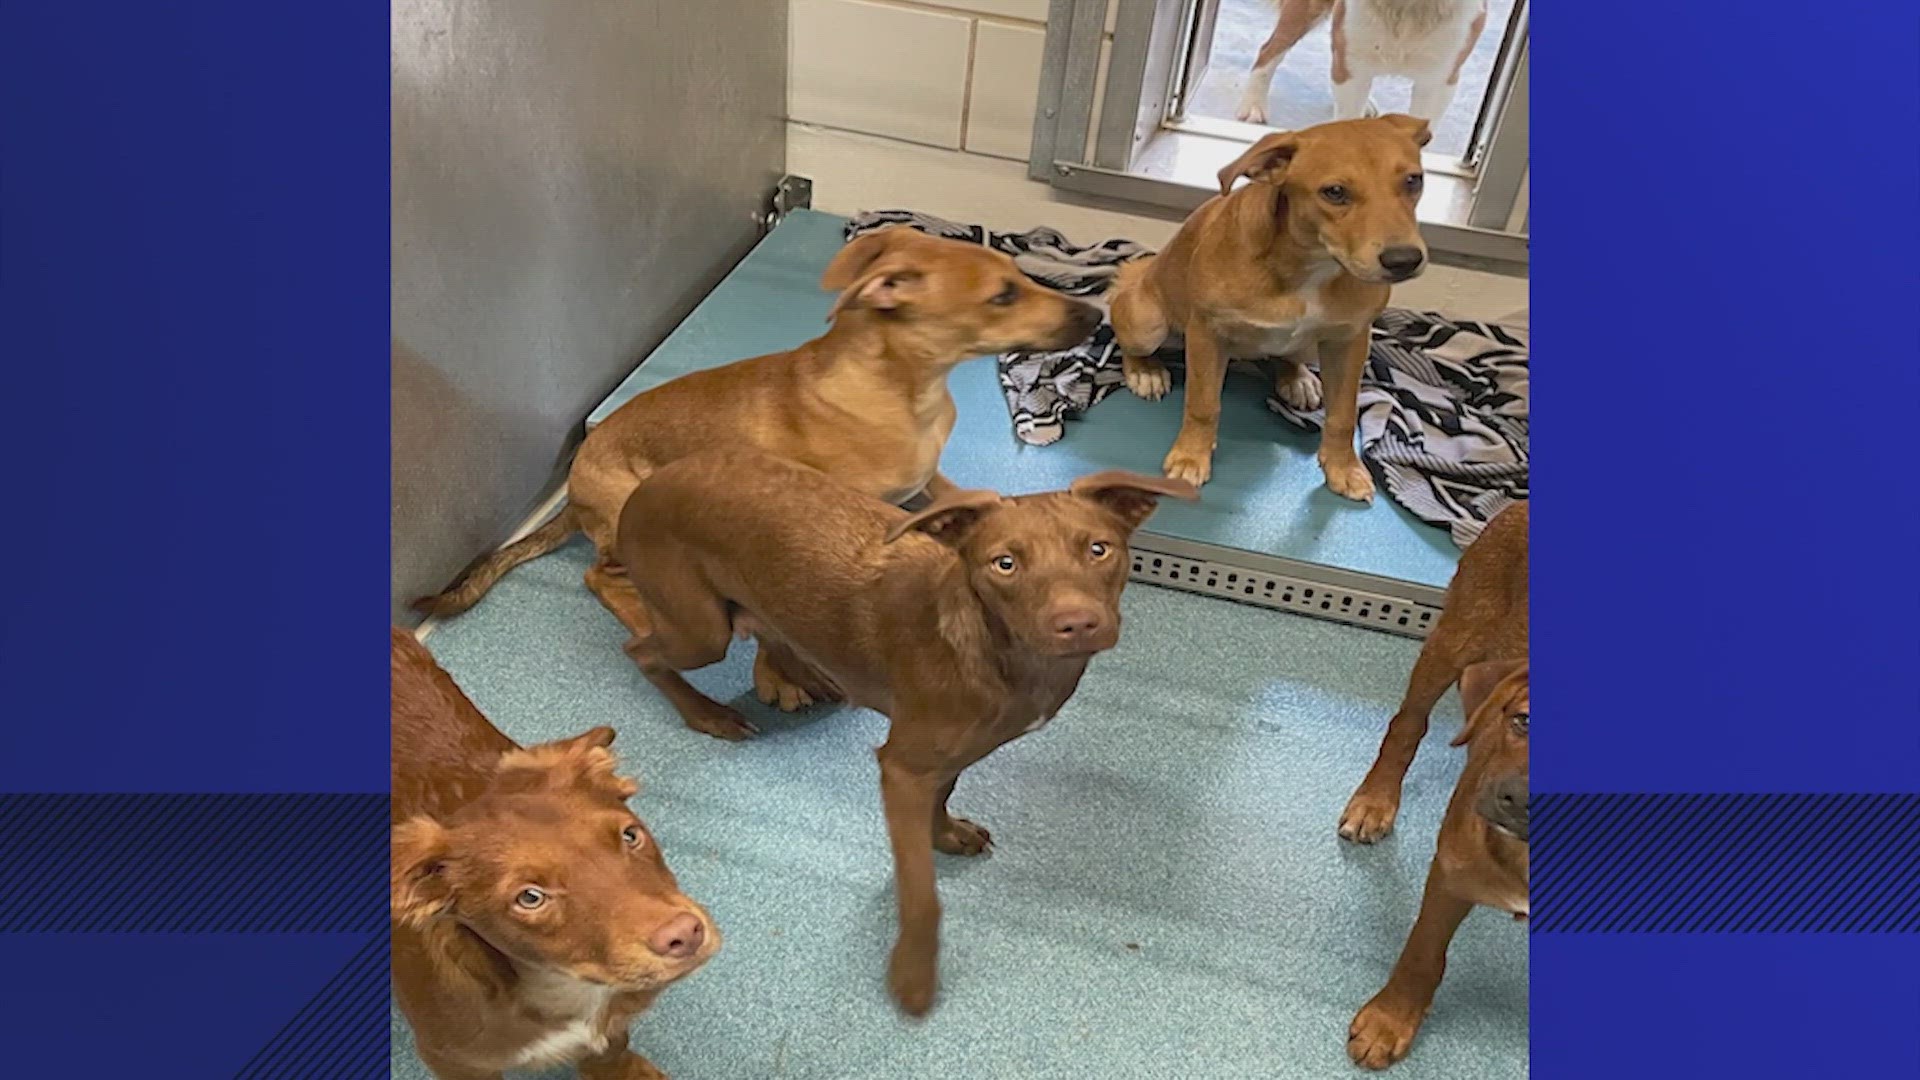 The Pearland Animal Shelter is asking for the public's help finding foster homes and forever homes for the approximately 85 dogs taken from the home.